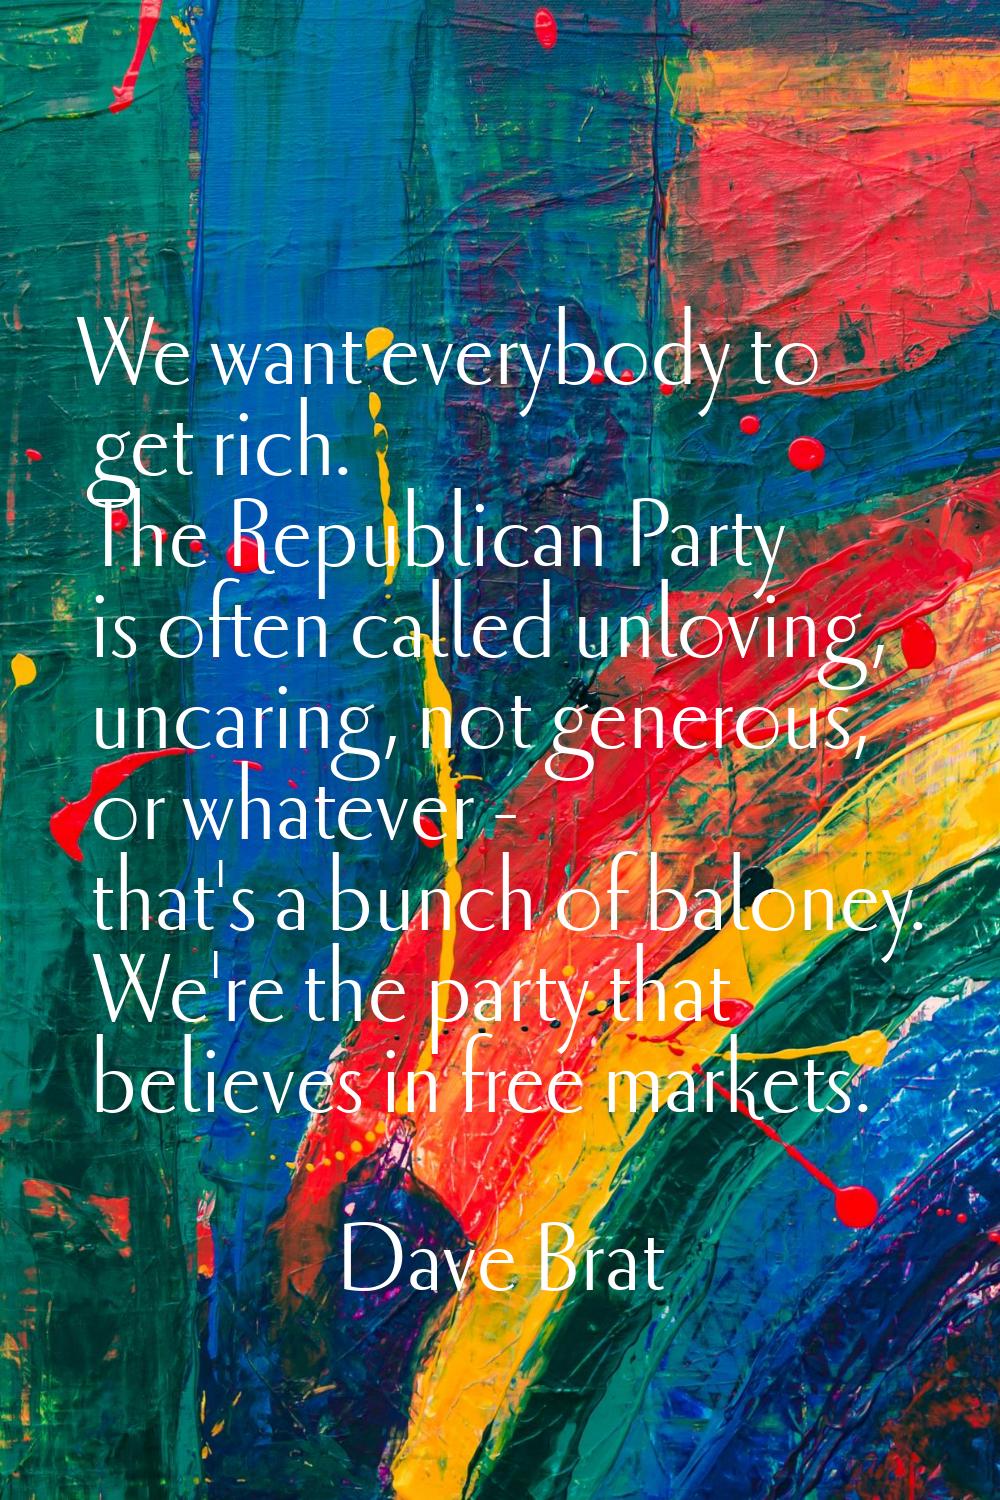 We want everybody to get rich. The Republican Party is often called unloving, uncaring, not generou